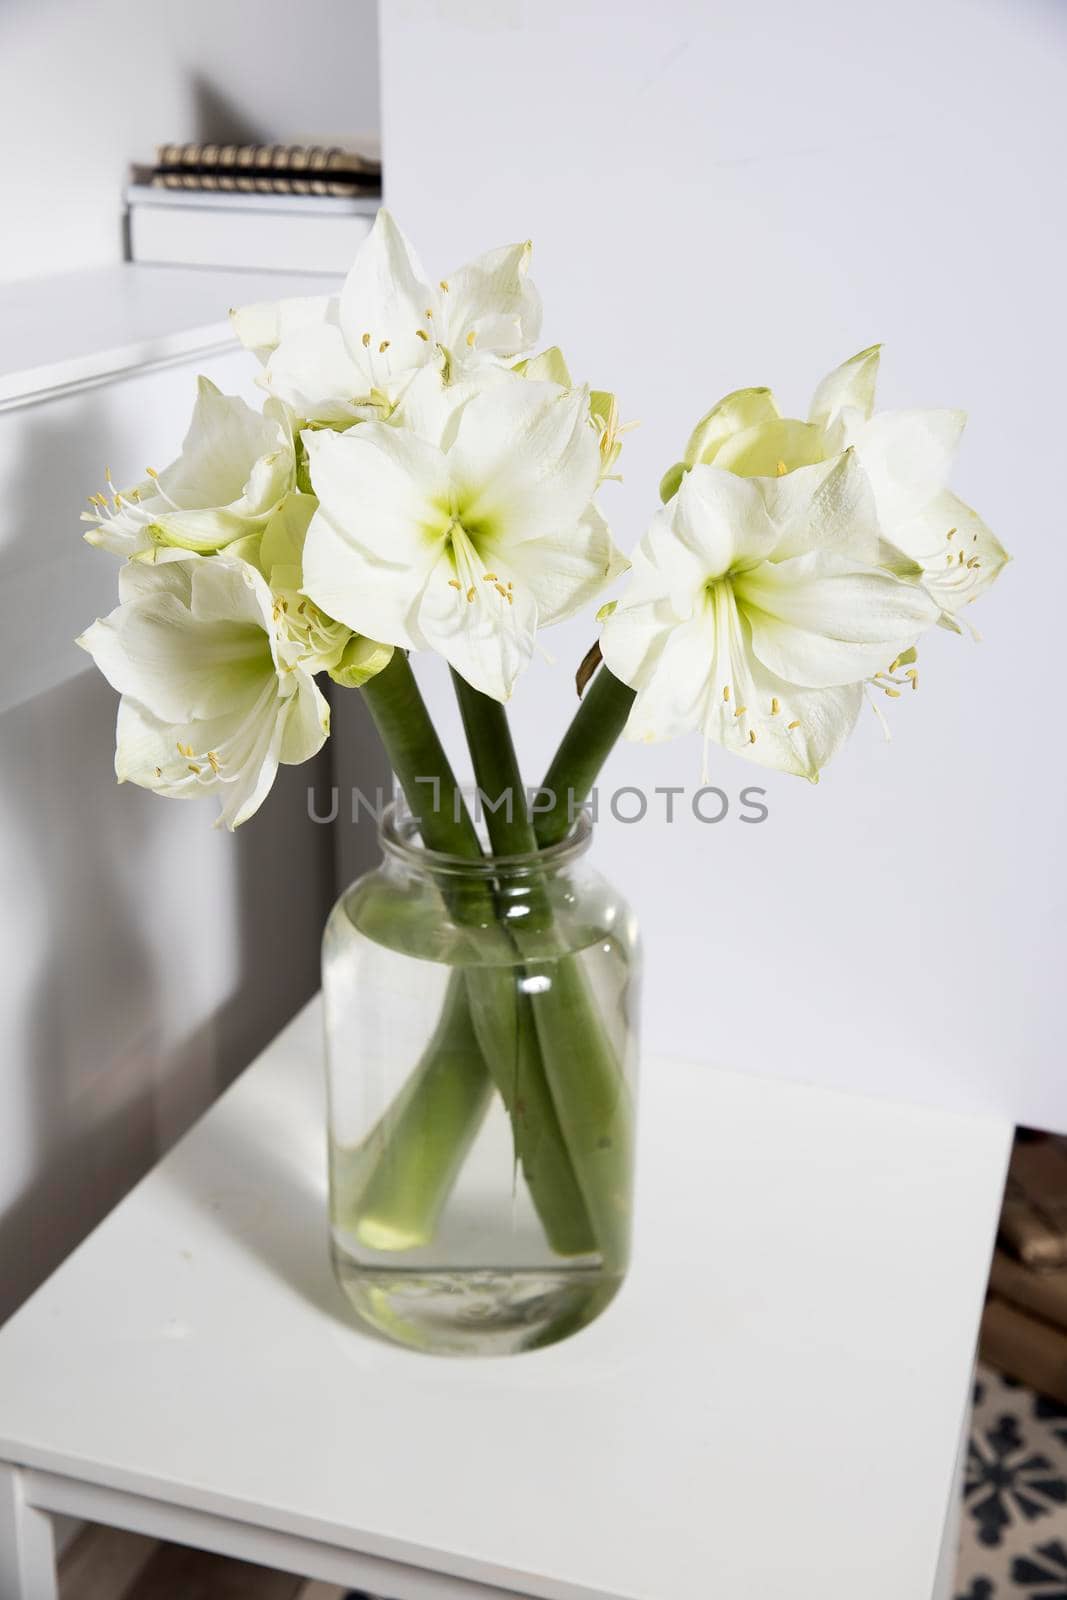 Bouquet of white lilies in a tall glass vase on a beige table against a gray wall. Copy space. Fresh bud